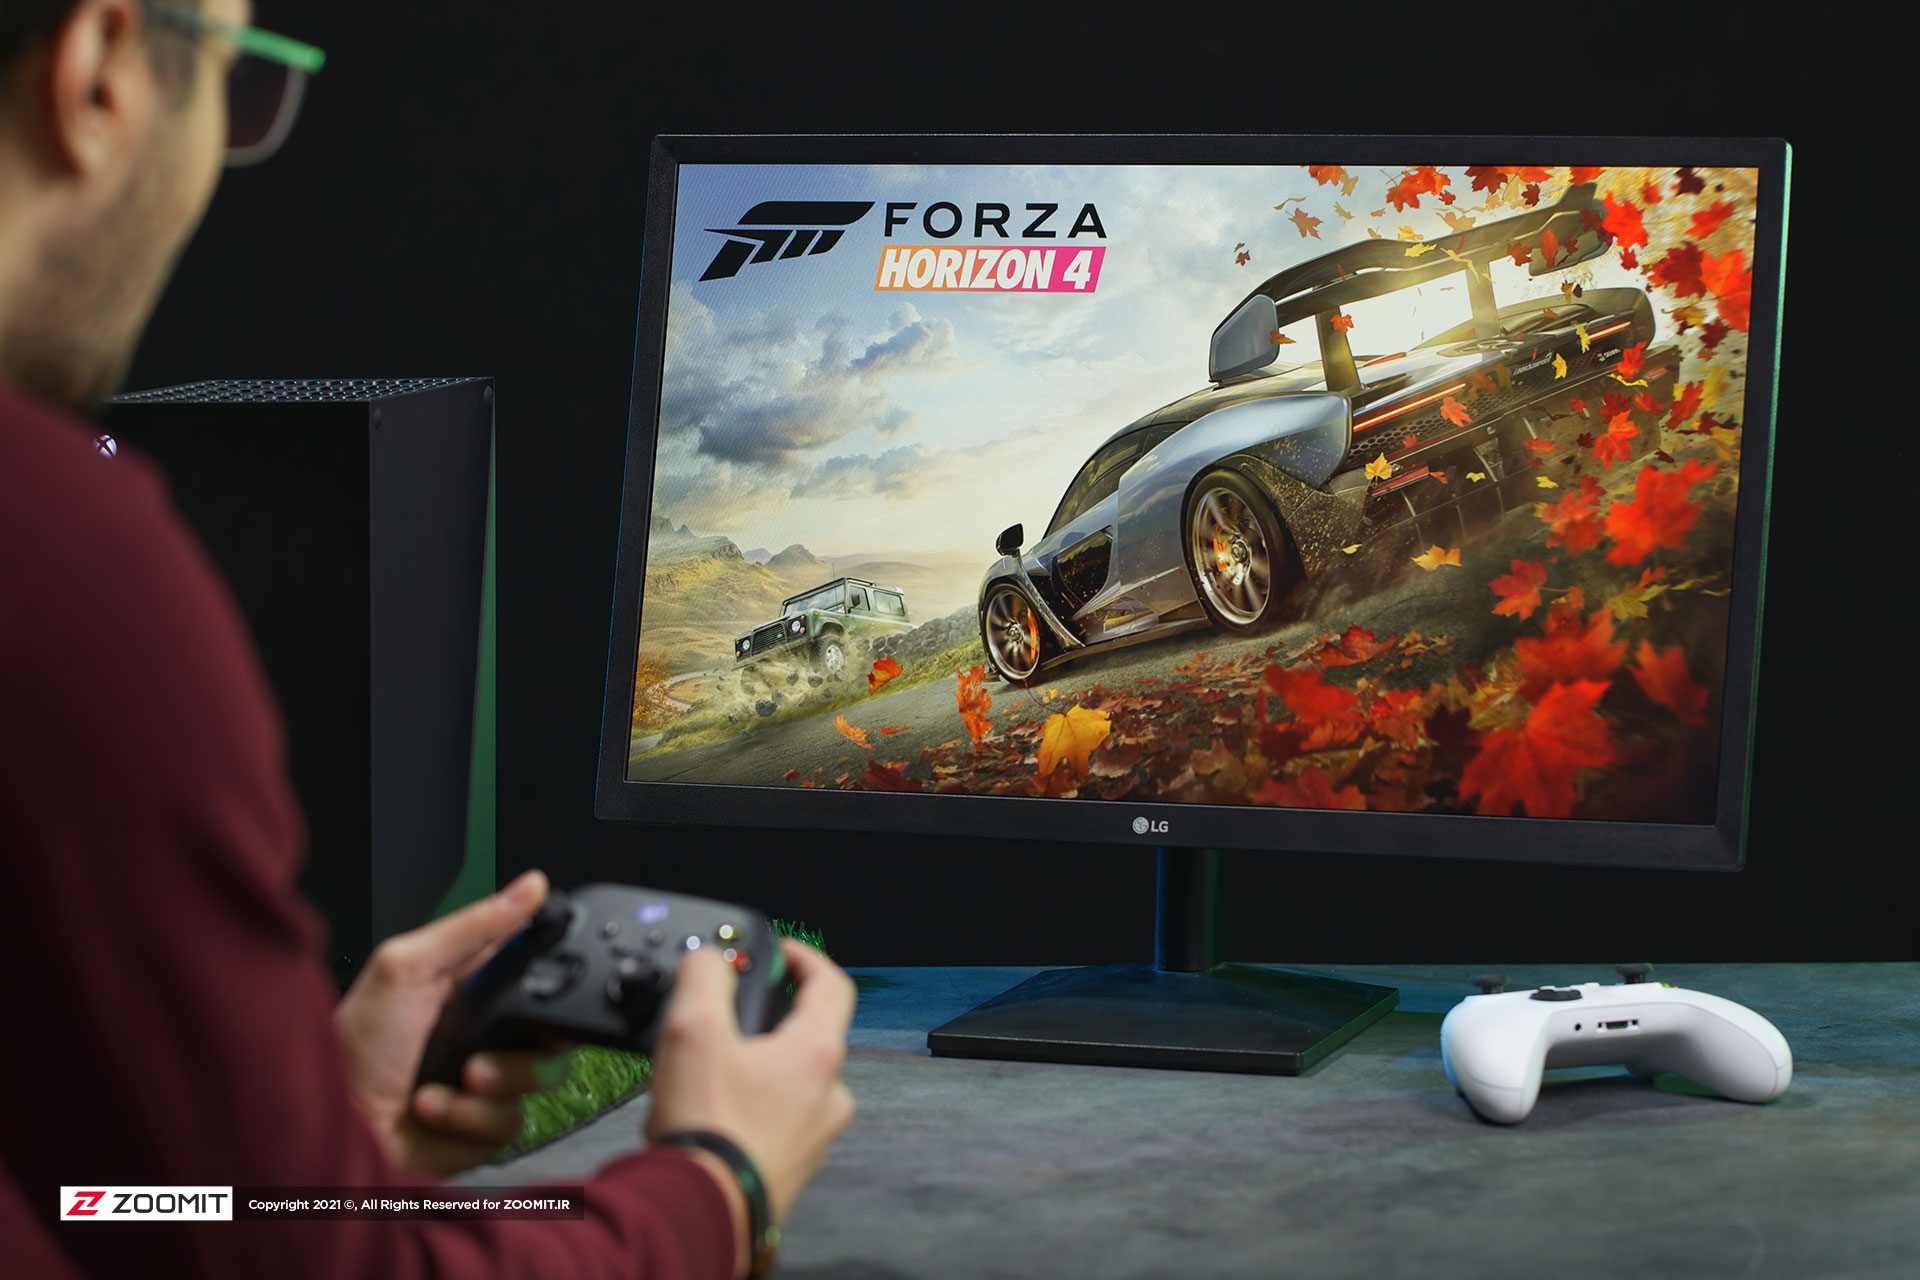 2021 3 man playing forza game with controller microsoft xbox series x 638c64fea77666af5aef0fca